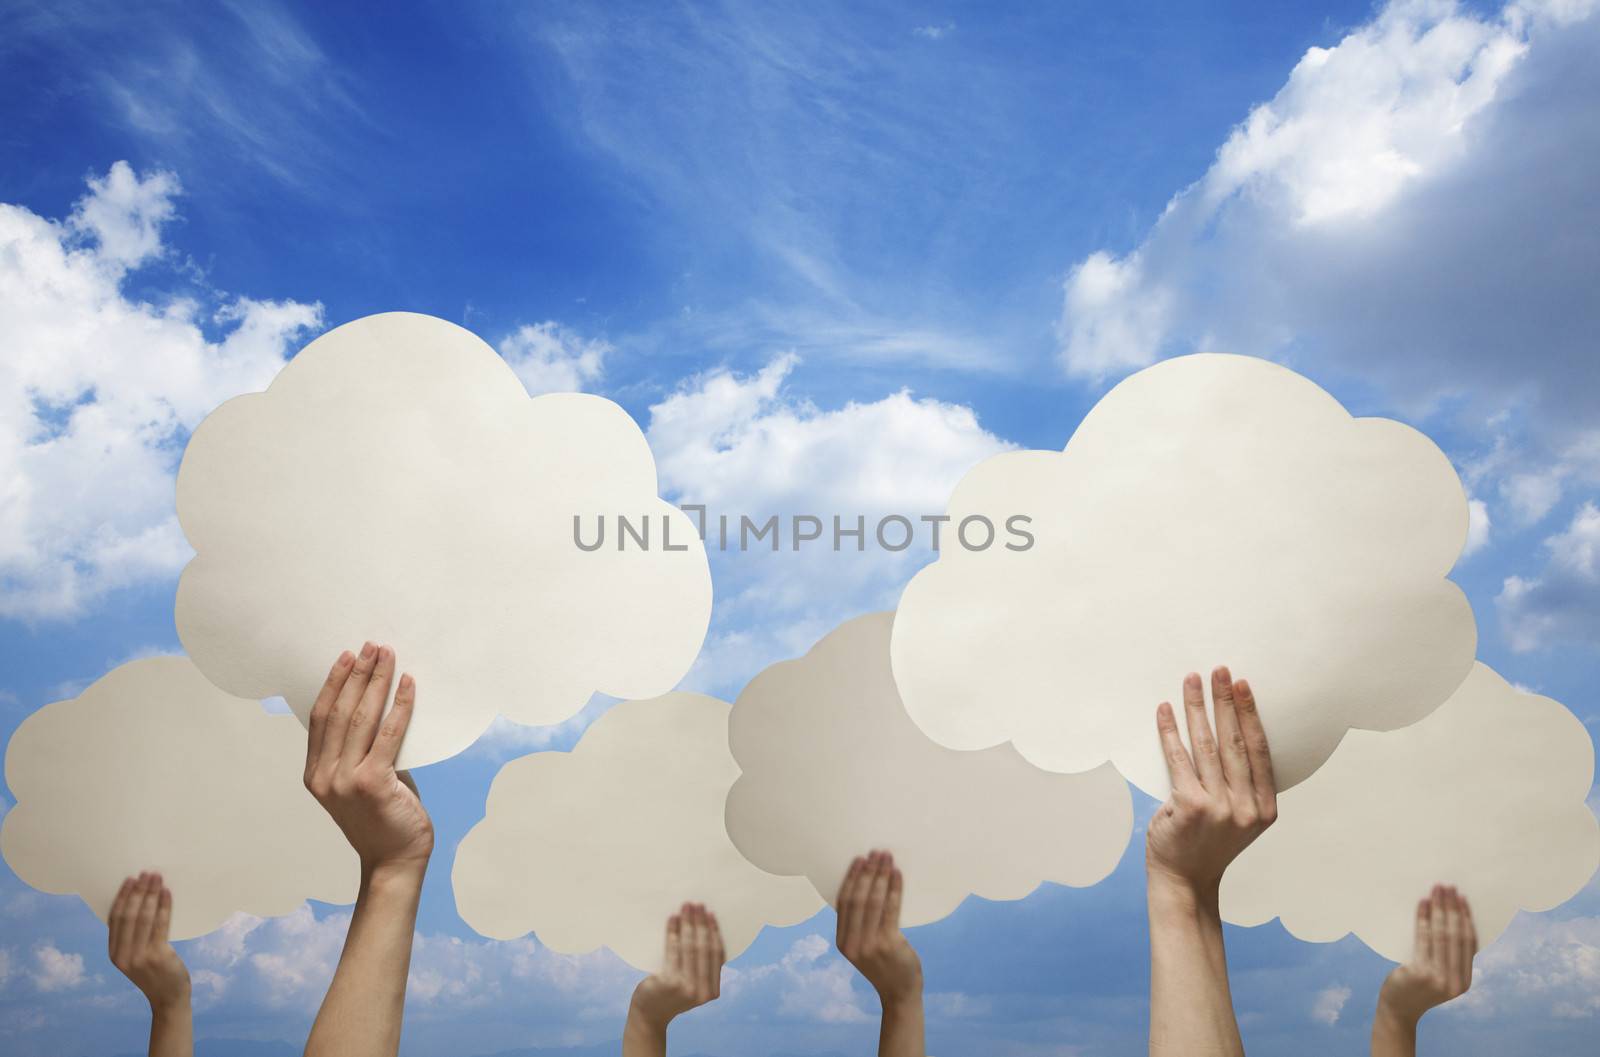 Multiple hands holding cut out paper clouds against a blue sky with clouds by XiXinXing